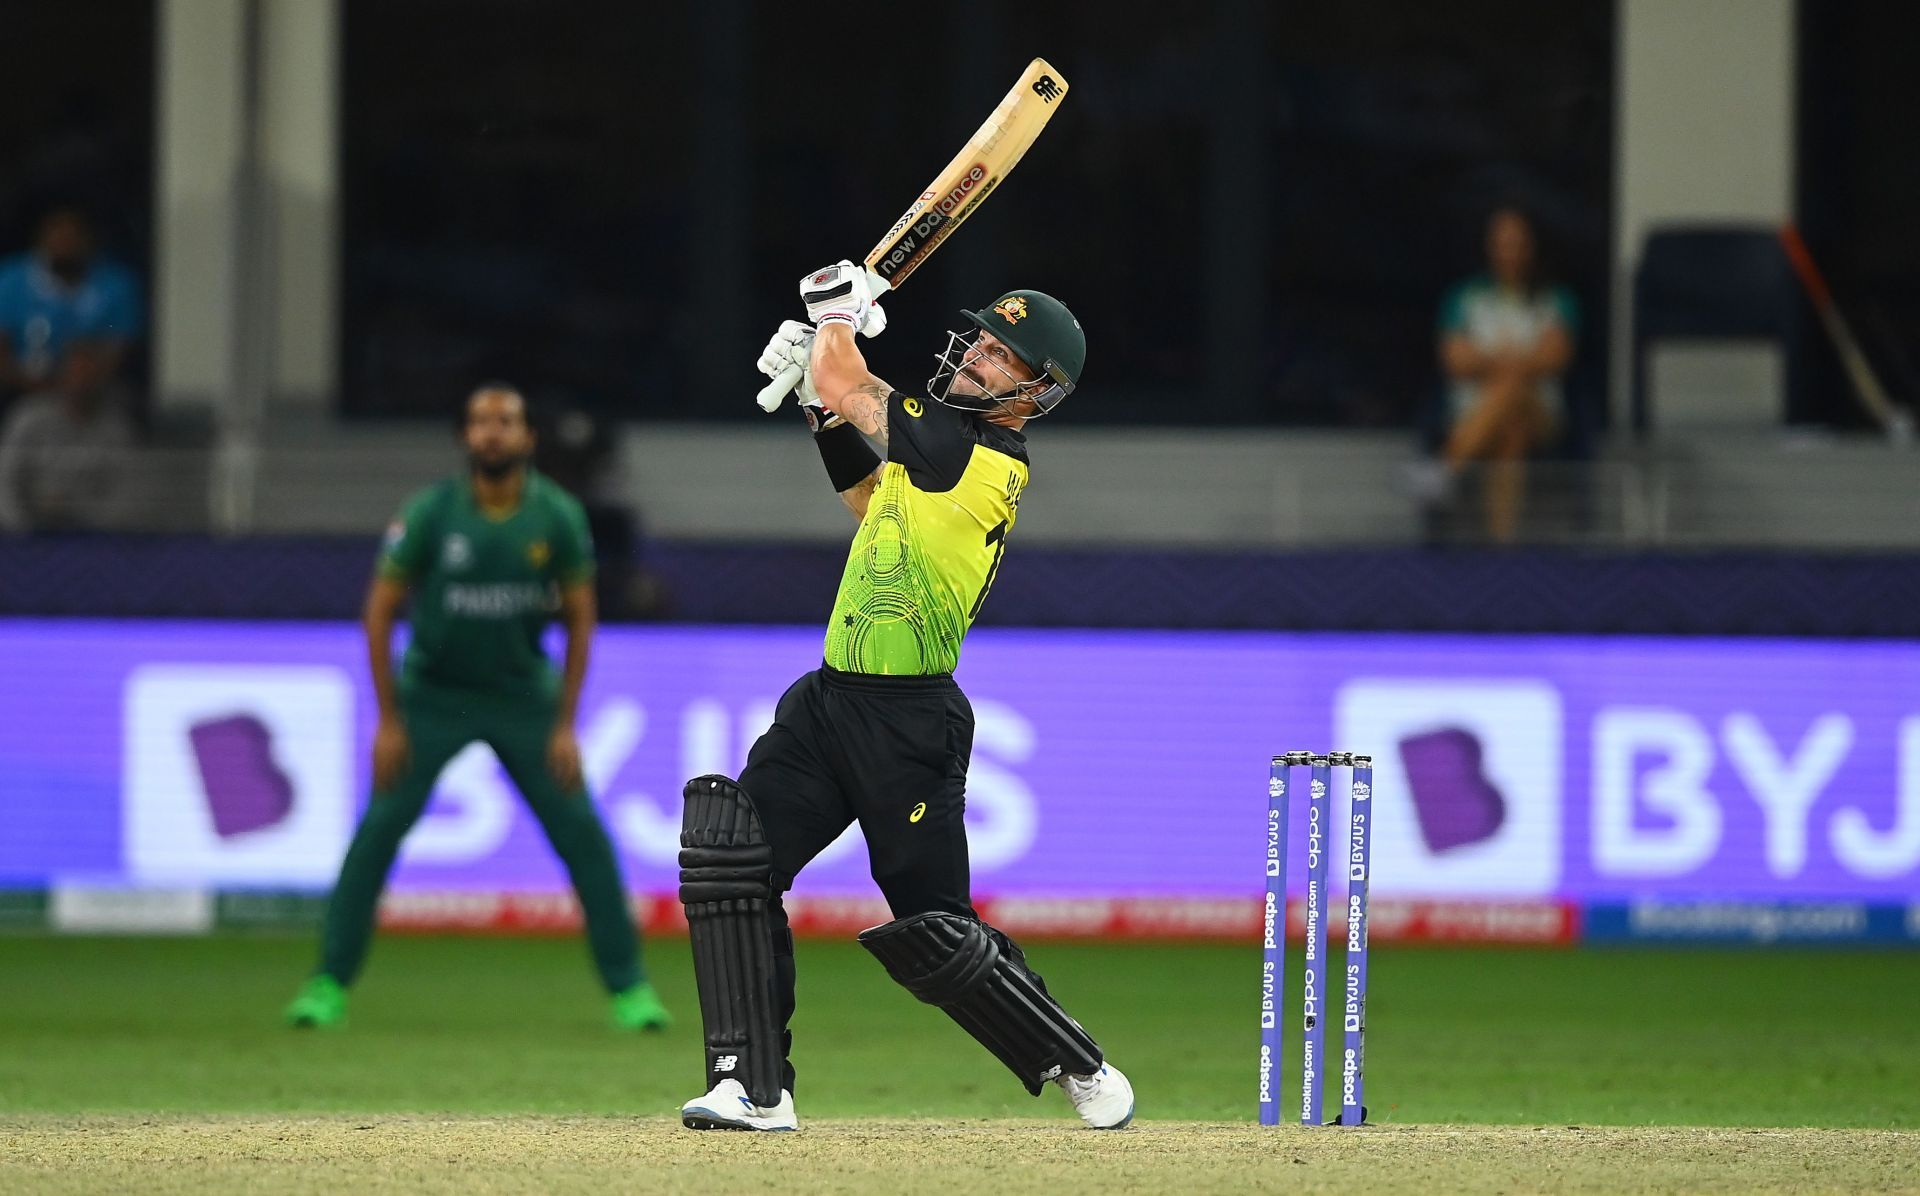 Matthew Wade batting against Pakistan in the semi-finals. Pic: Getty Images